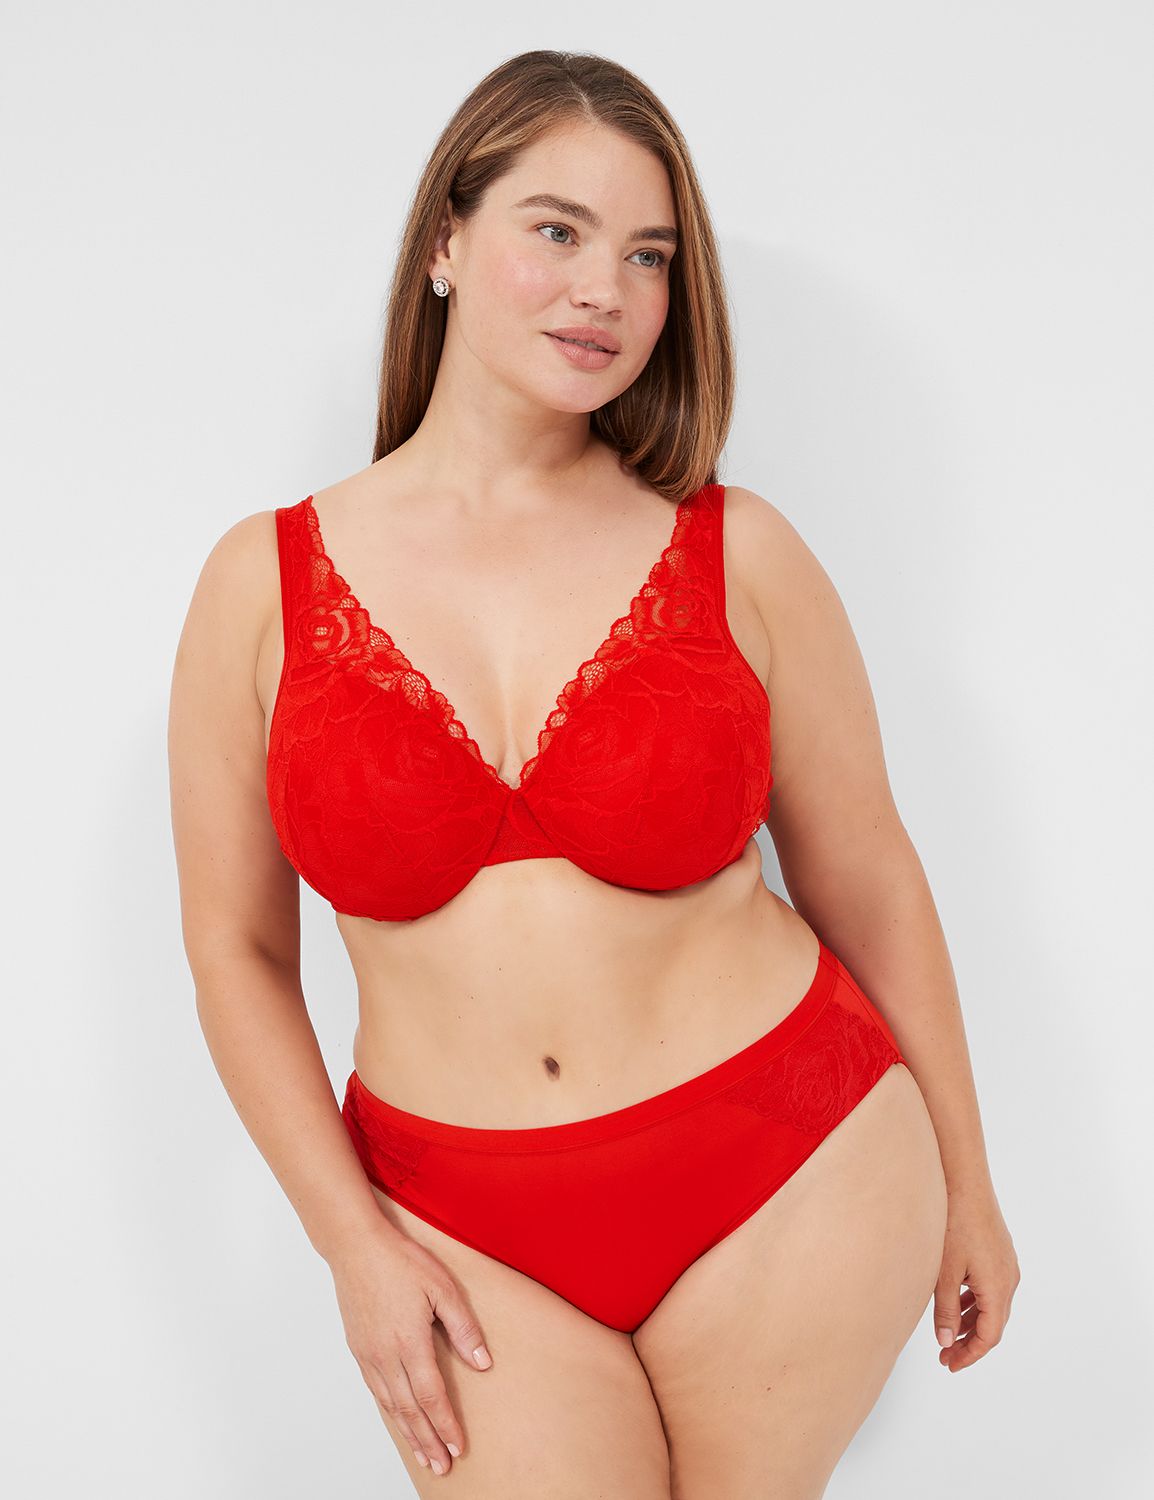 Red Supportive Plus Size Bras For Women